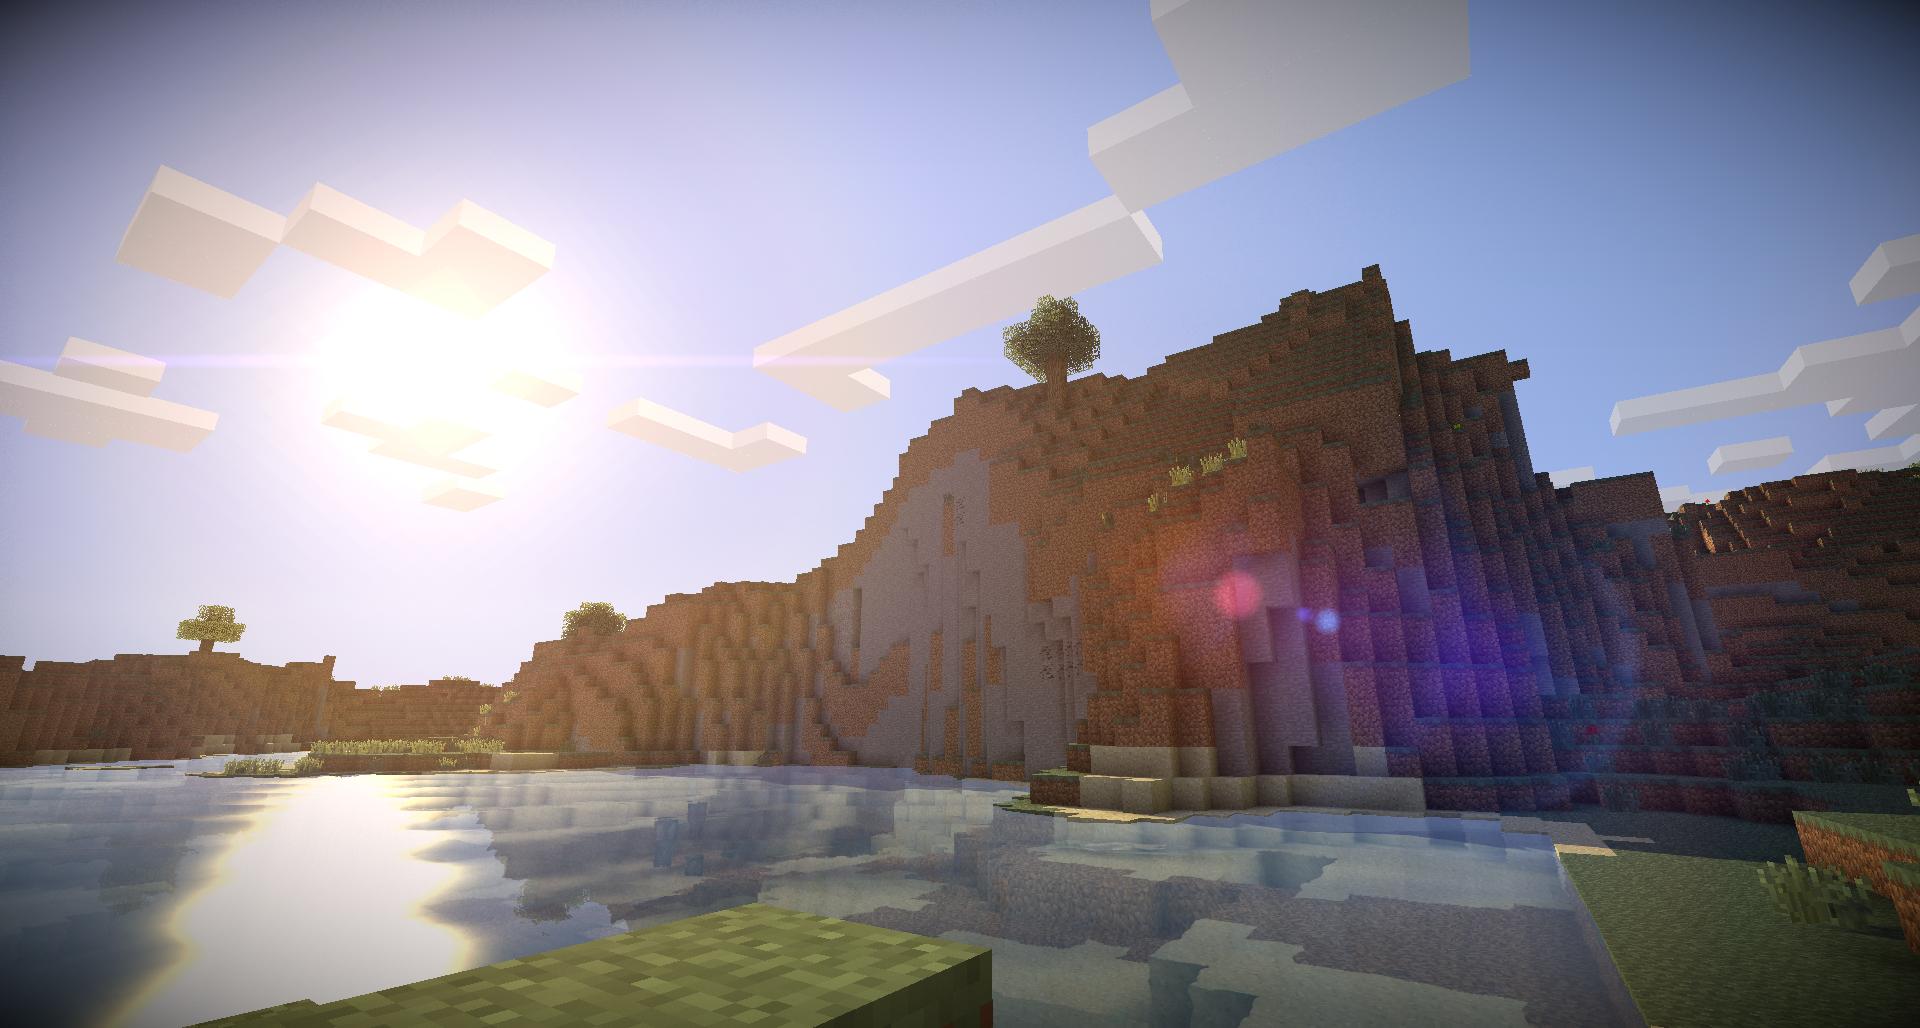 minecraft shaders texture pack 1.14.4